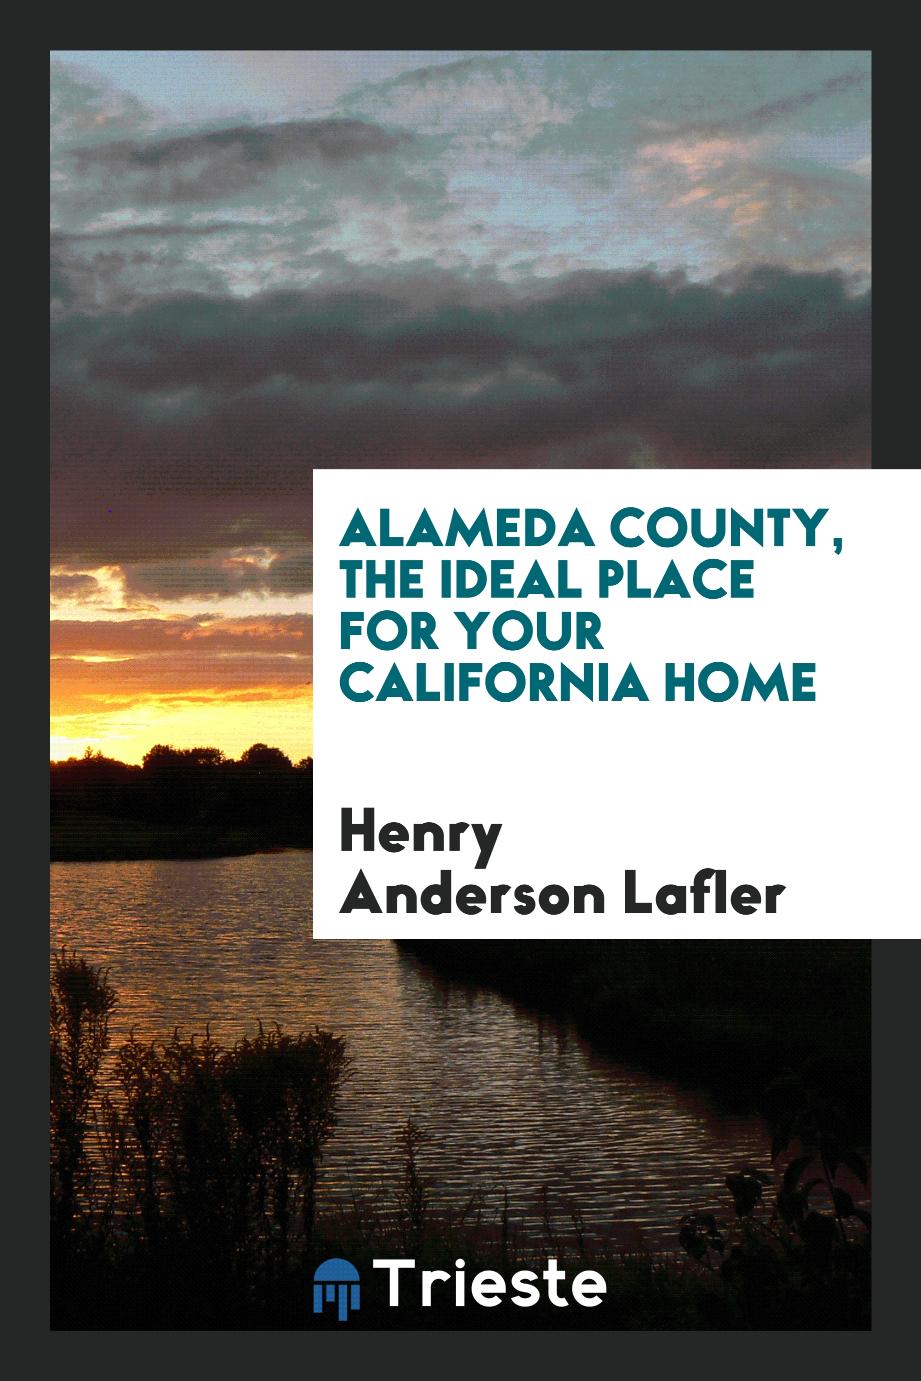 Alameda County, the Ideal Place for Your California Home